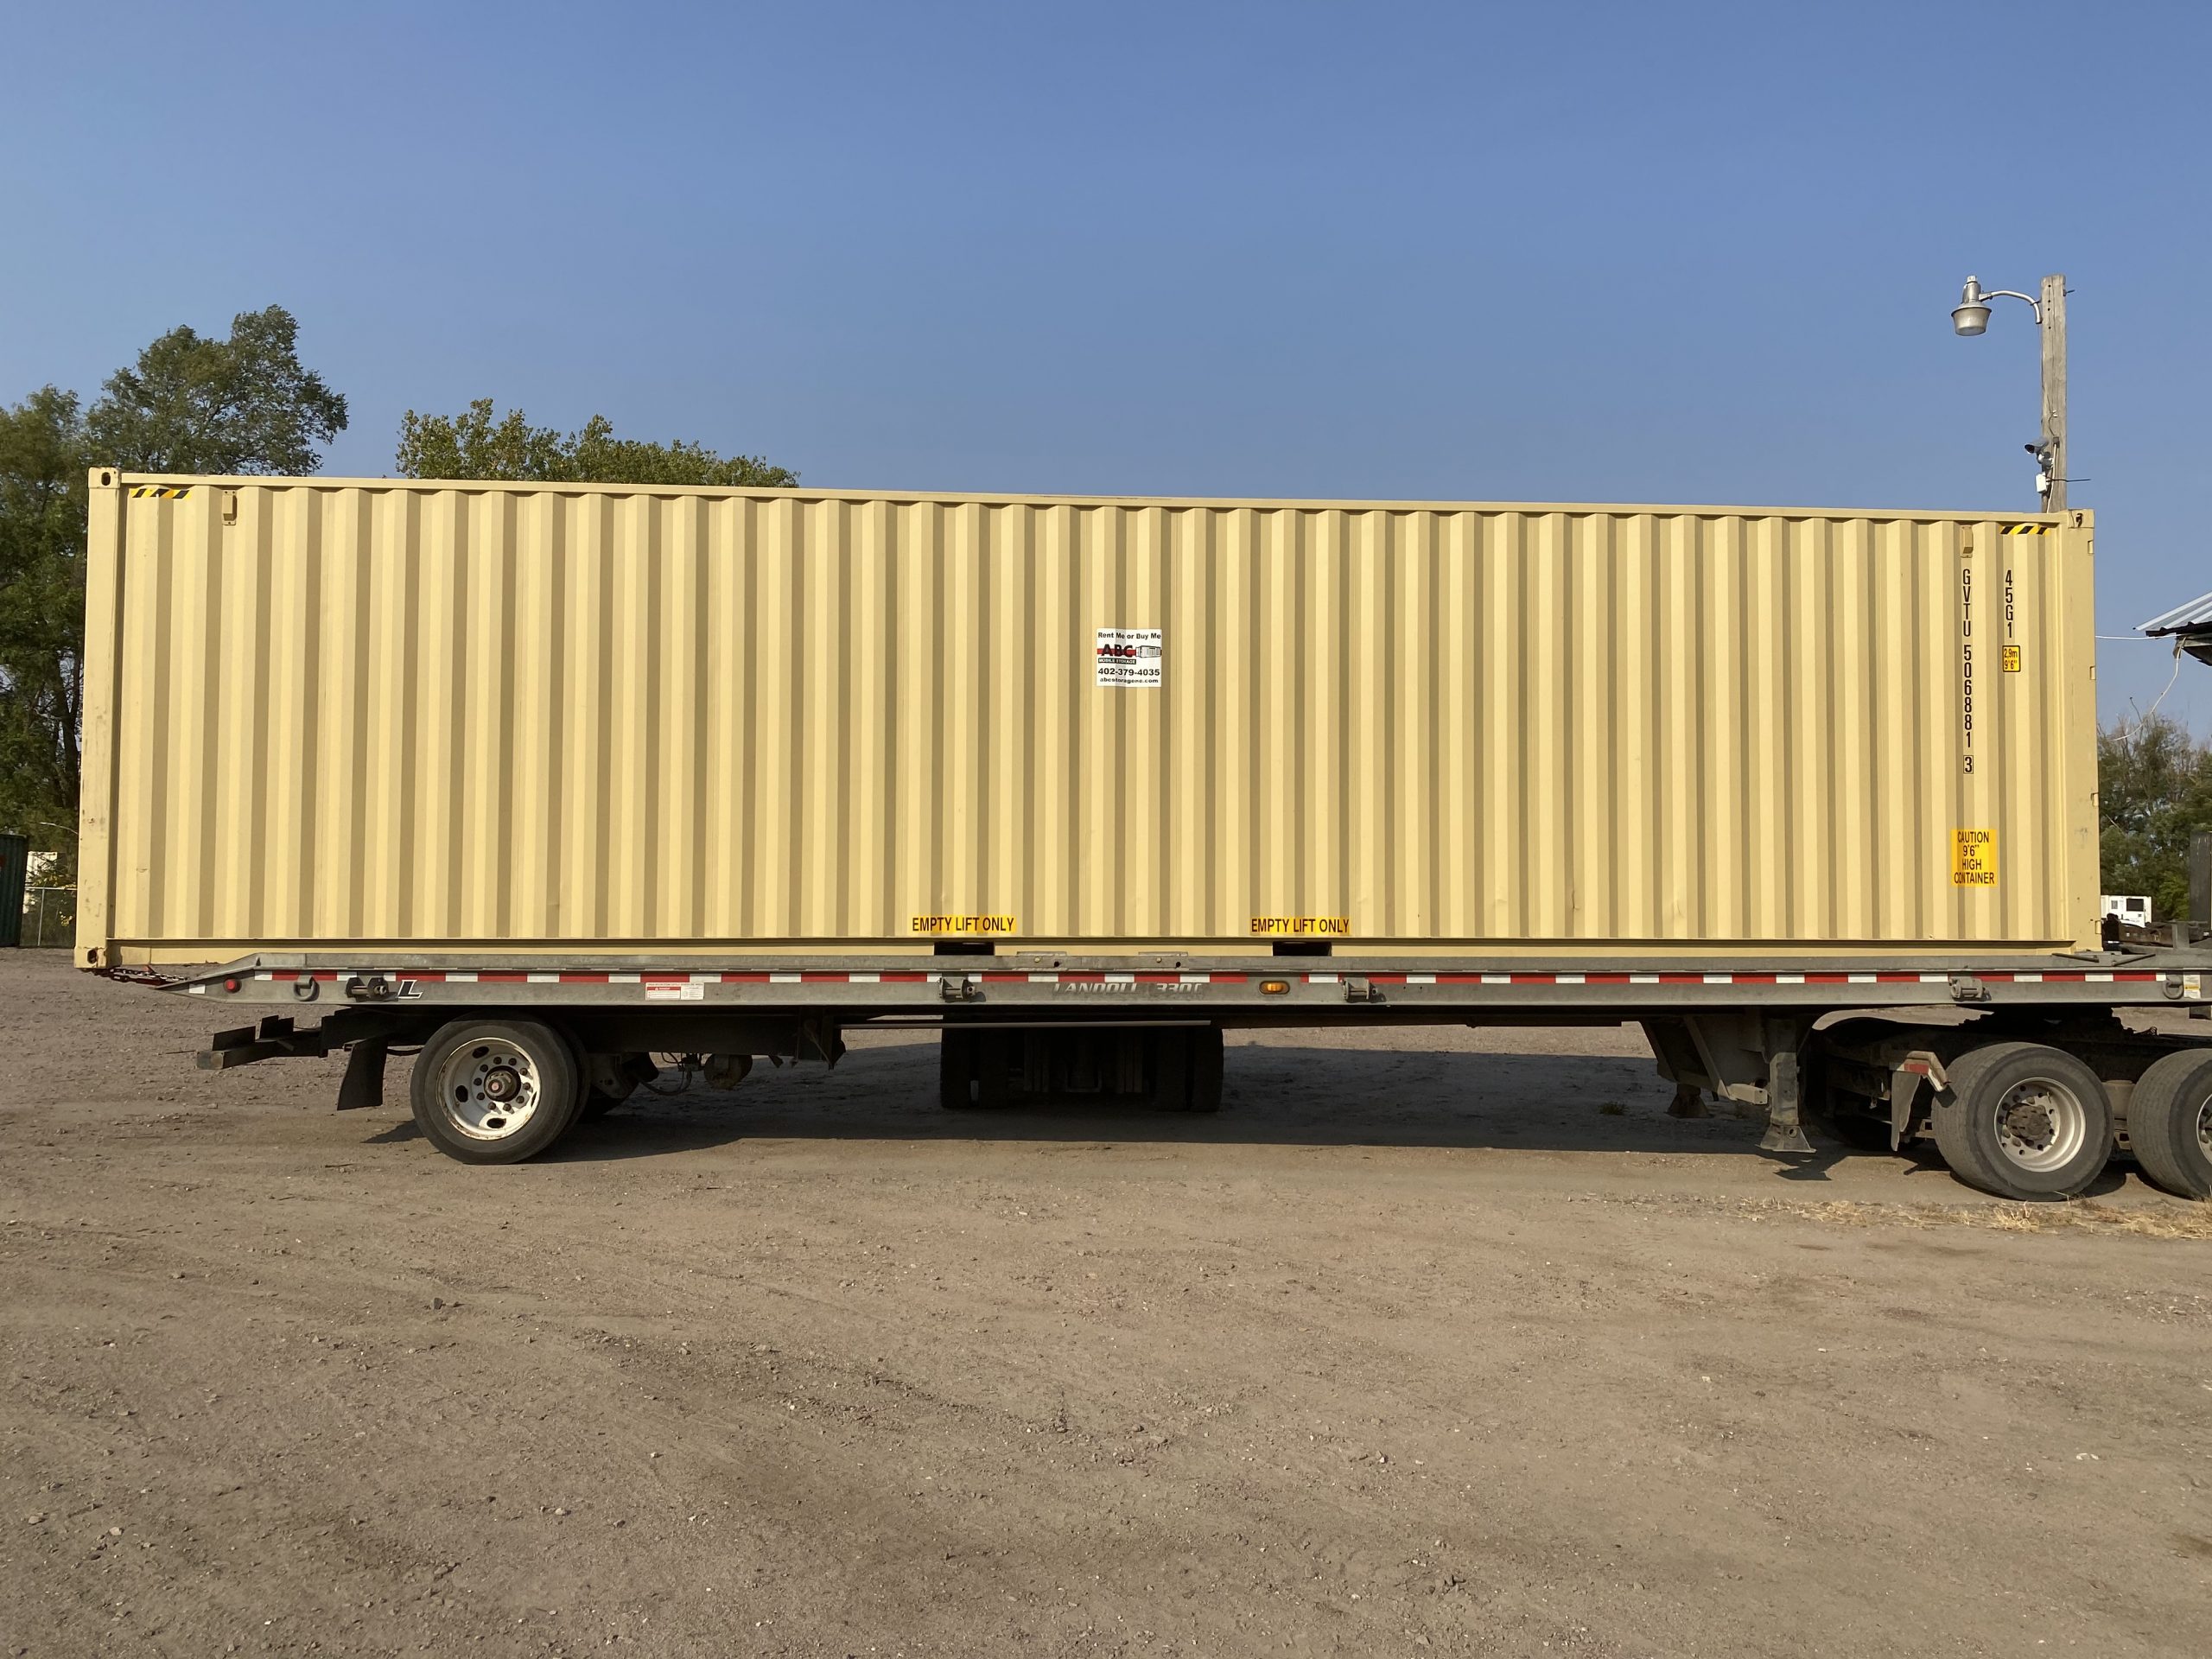 Buy or Rent Shipping Containers- the Ultimate Guide! - Well Articles